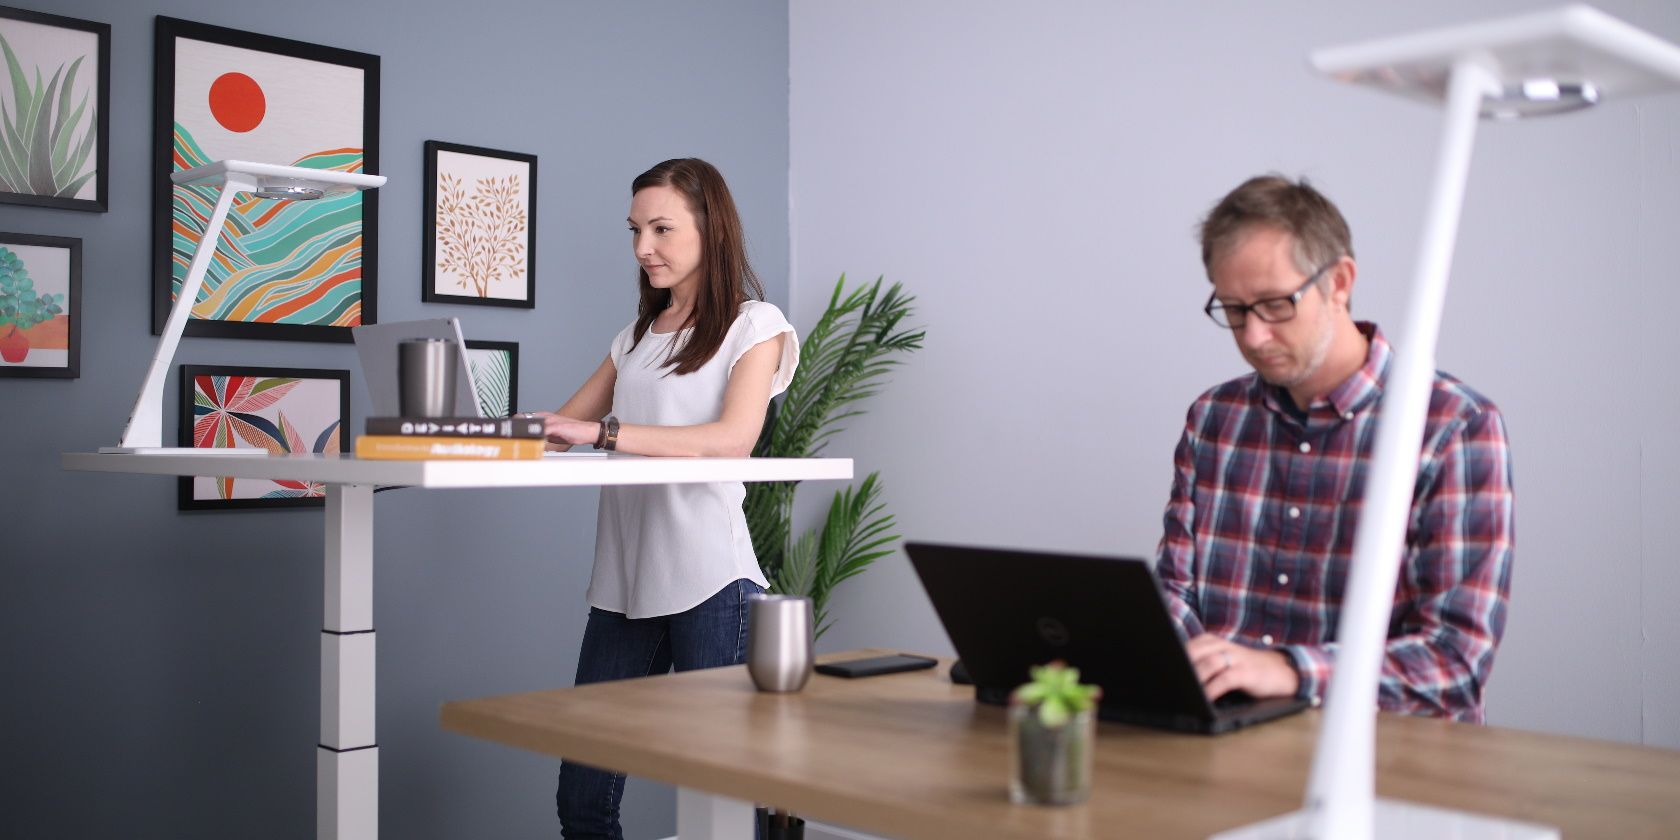 Top 10 Ergonomic Accessories for Home Office with the Standing Desk, by  Autonomous, #WorkSmarter